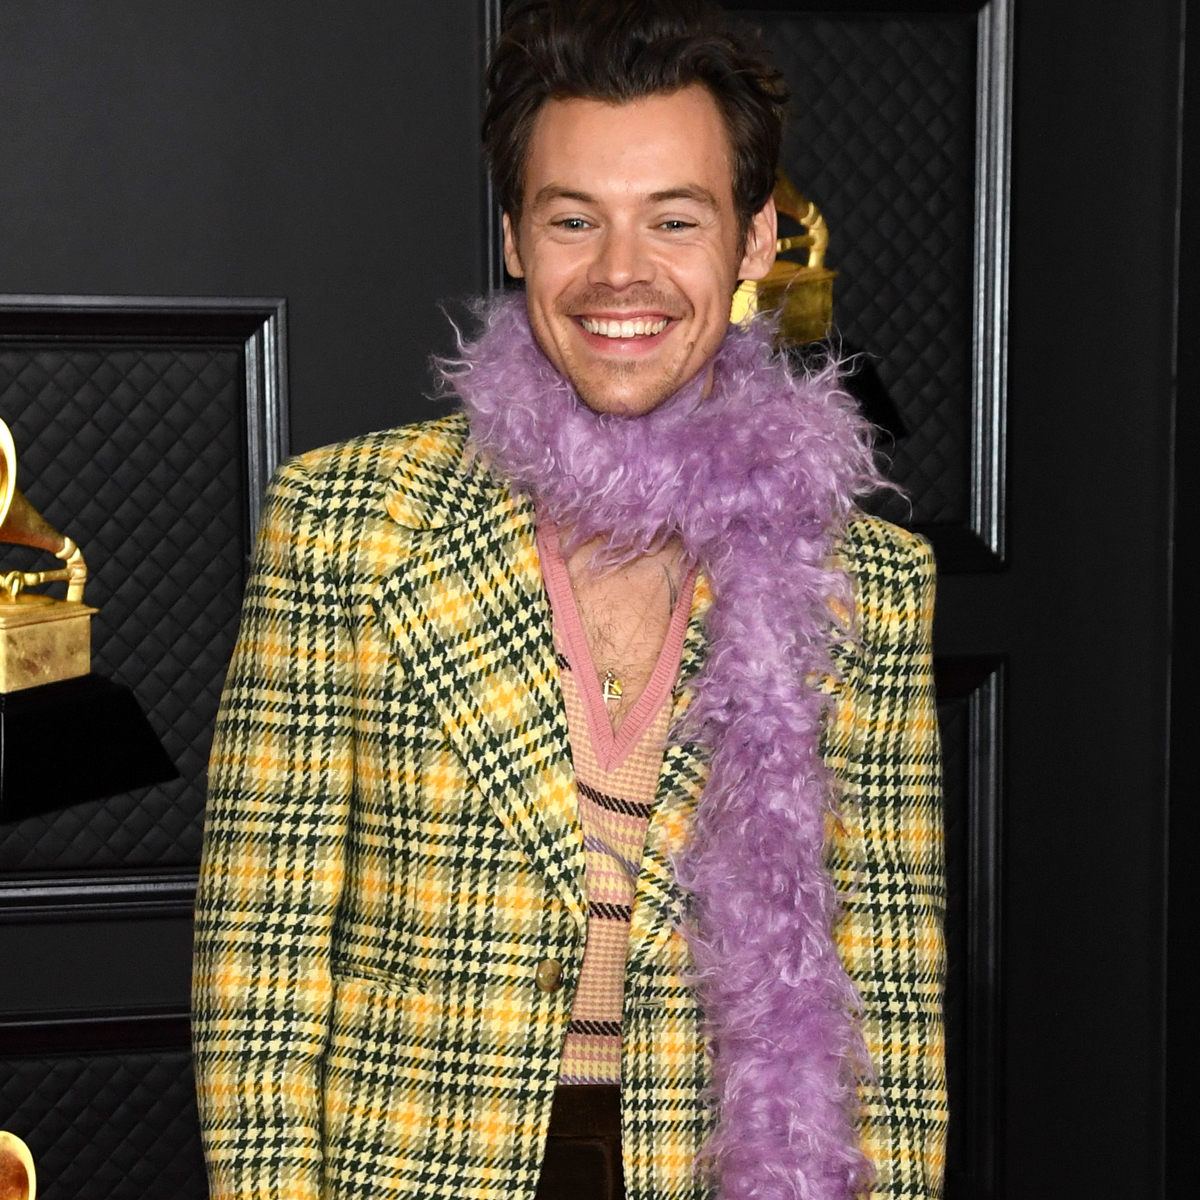 Harry Styles' Best Outfits: His Most Iconic Looks Yet